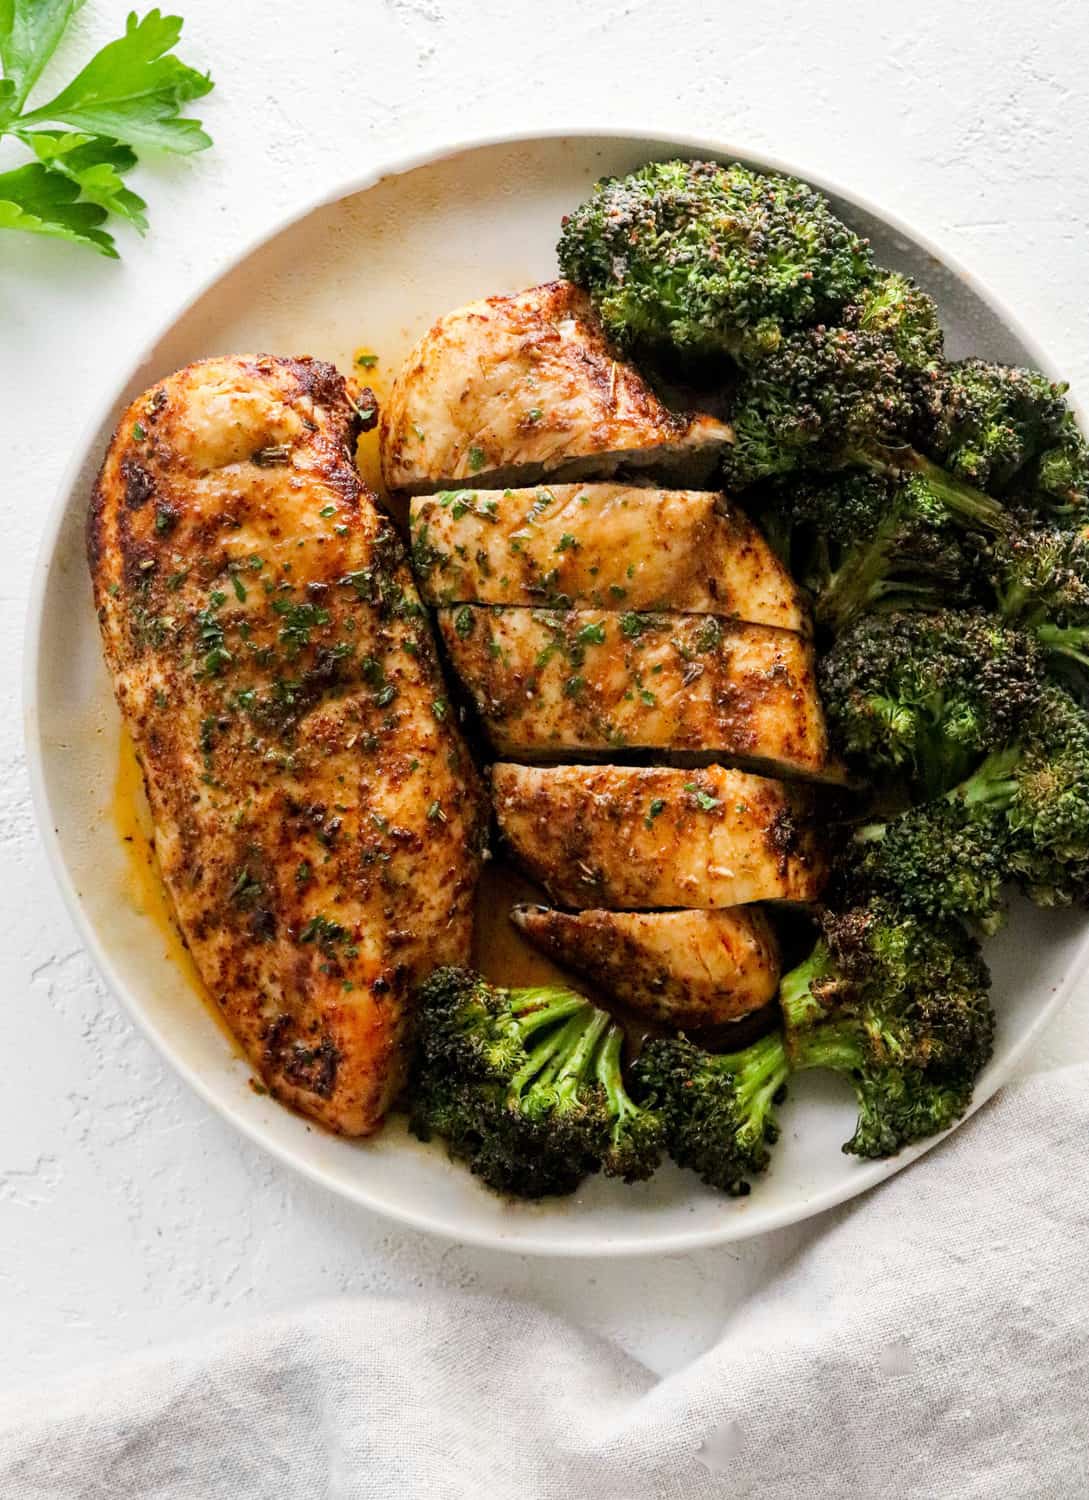 Seasoned cooked chicken beast on a round white plate with another pieces of sliced chicken next to it and cooked broccoli around it on the plate